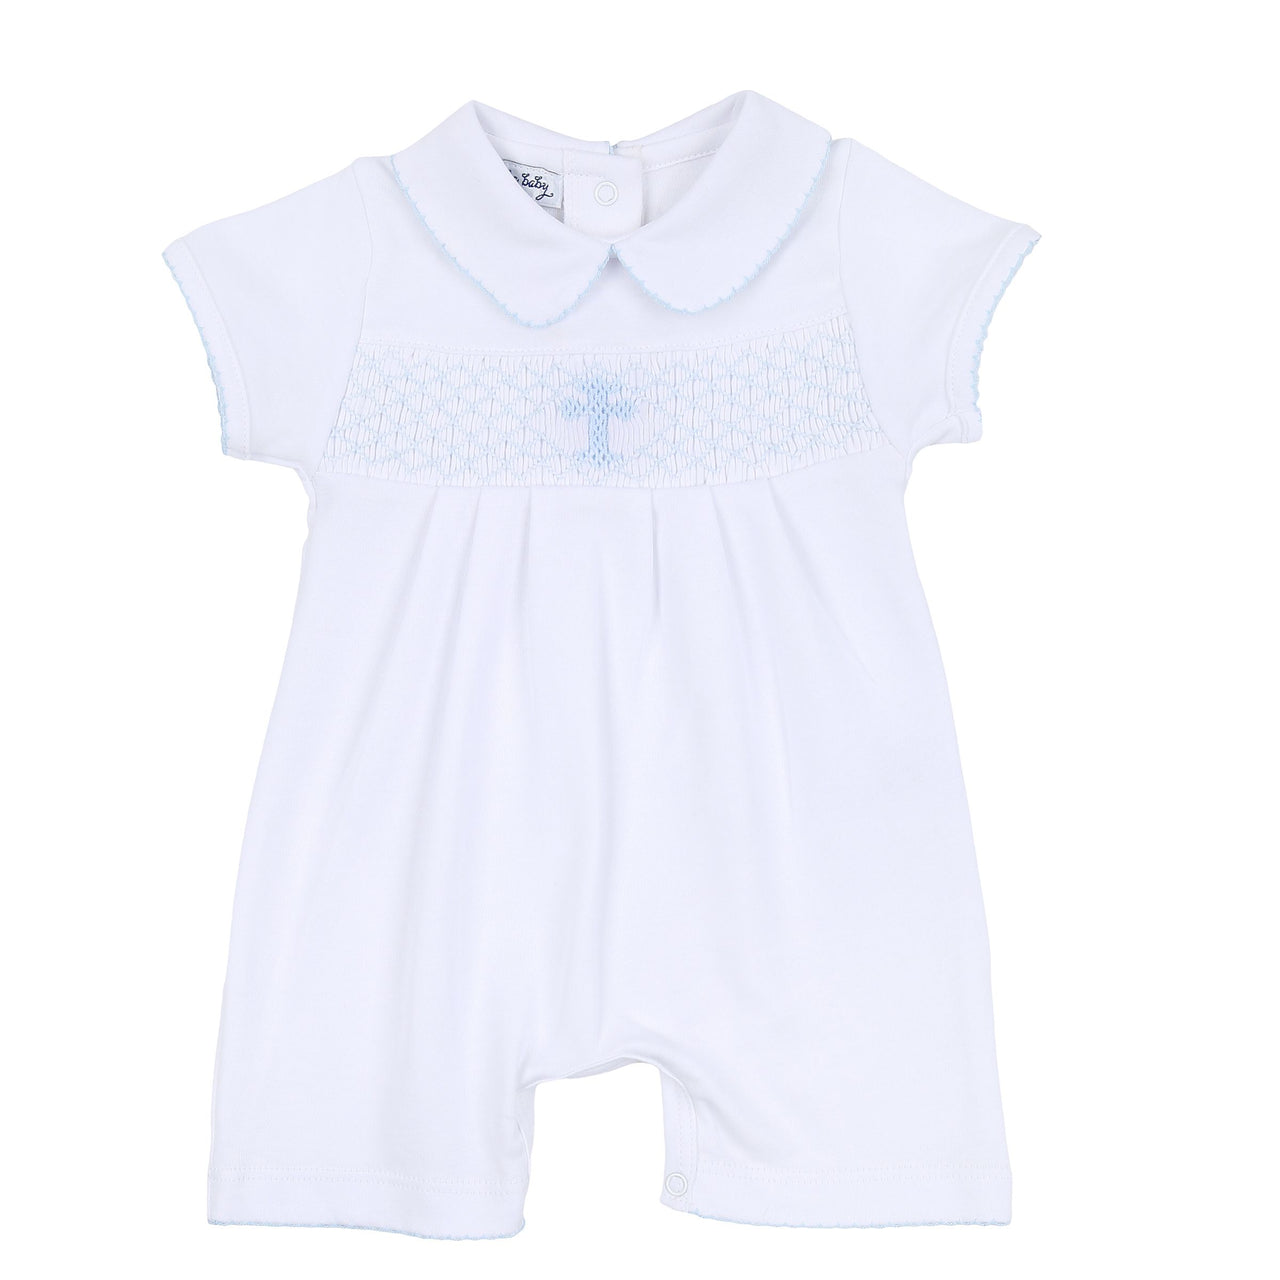 Magnolia Baby Smocked Collared Short Playsuit Blessed Spring 241312-965 5102